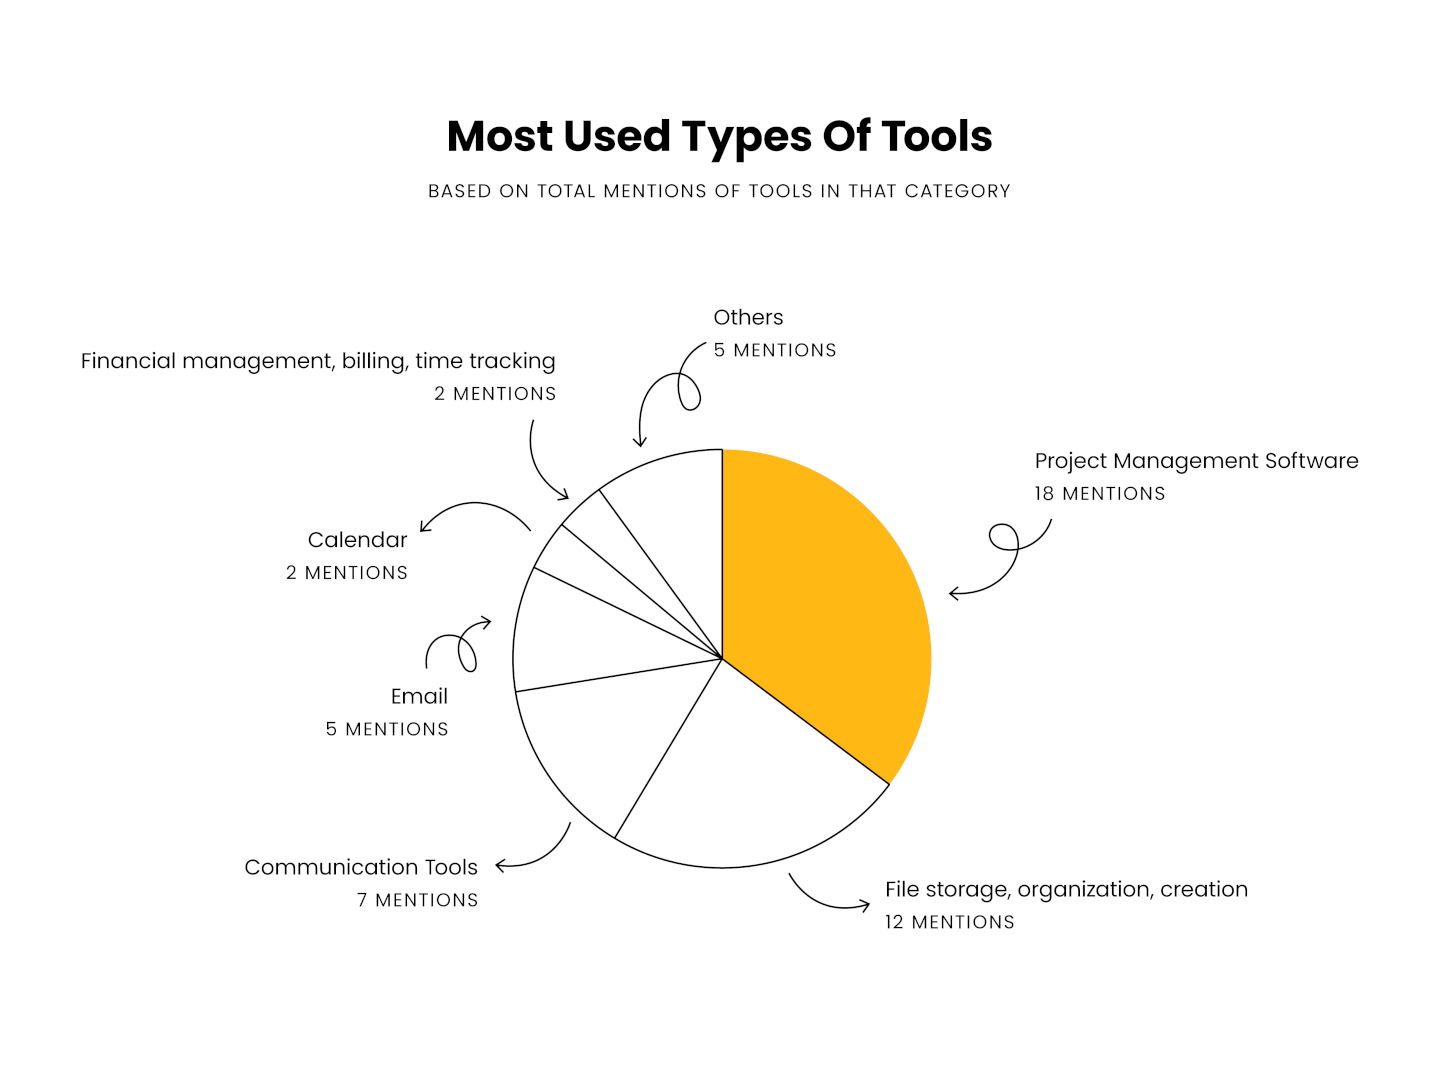 pie chart showing that project management software is the most used type of tool based on mentions